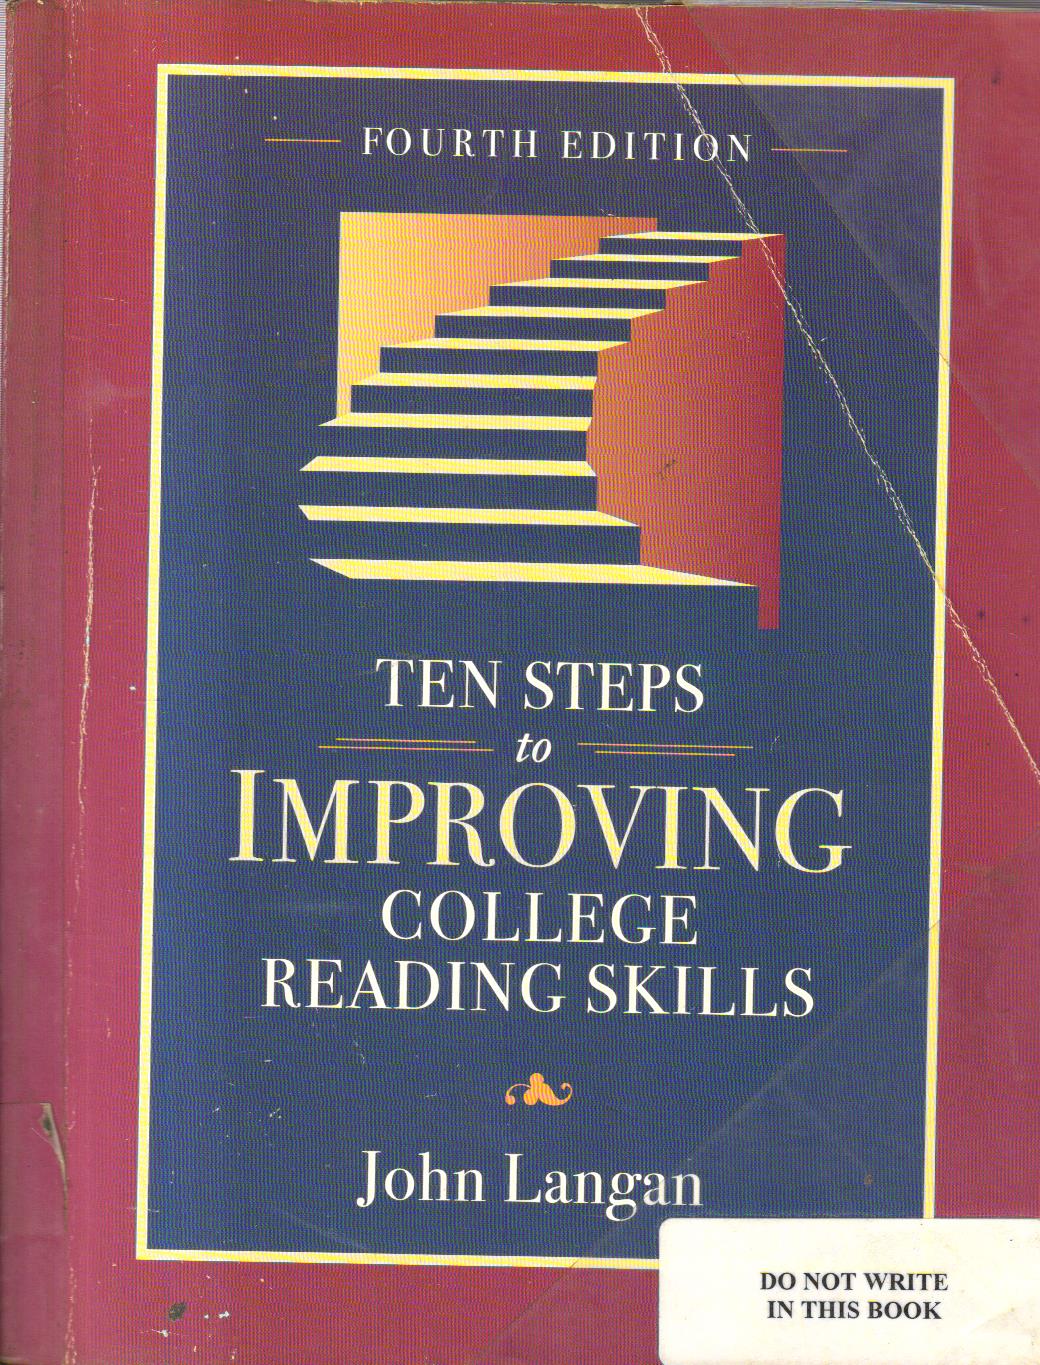 Ten Steps to Improving College Reading Skills.